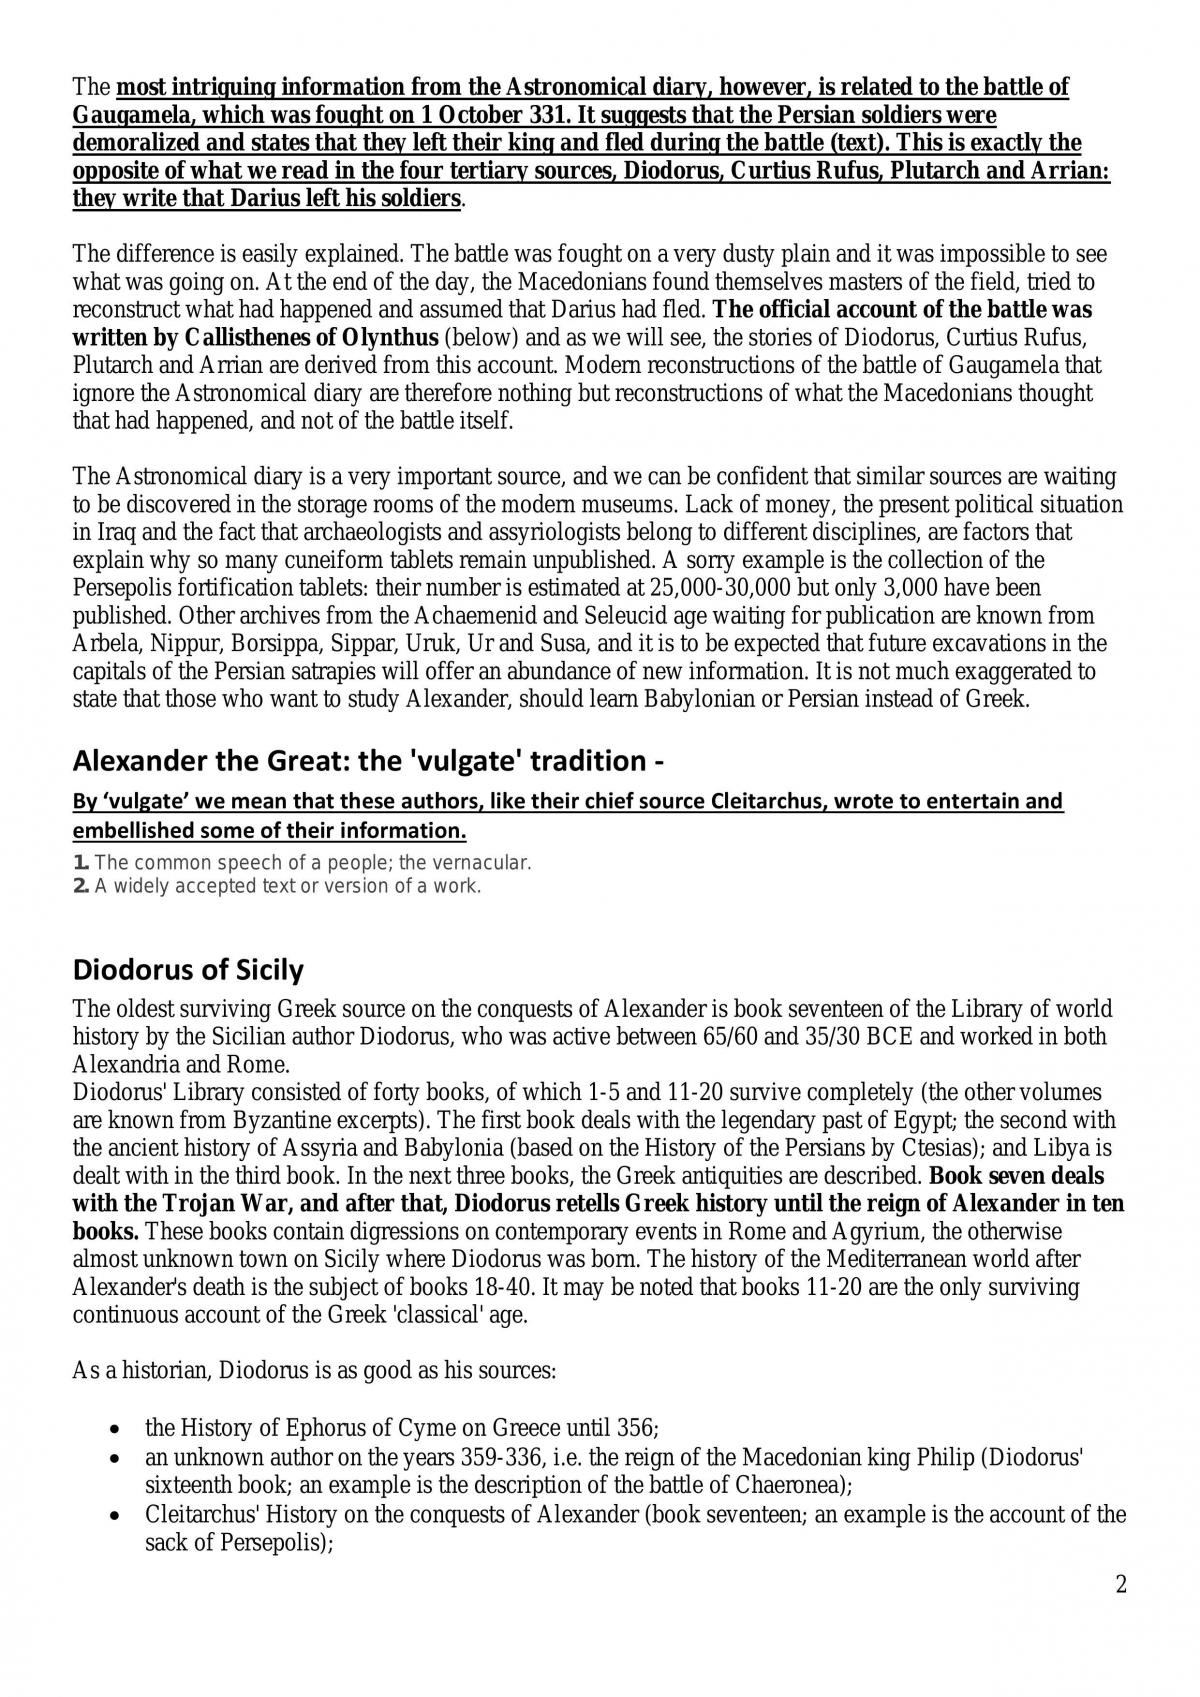 Alexander the Great Source Criticism  - Page 2